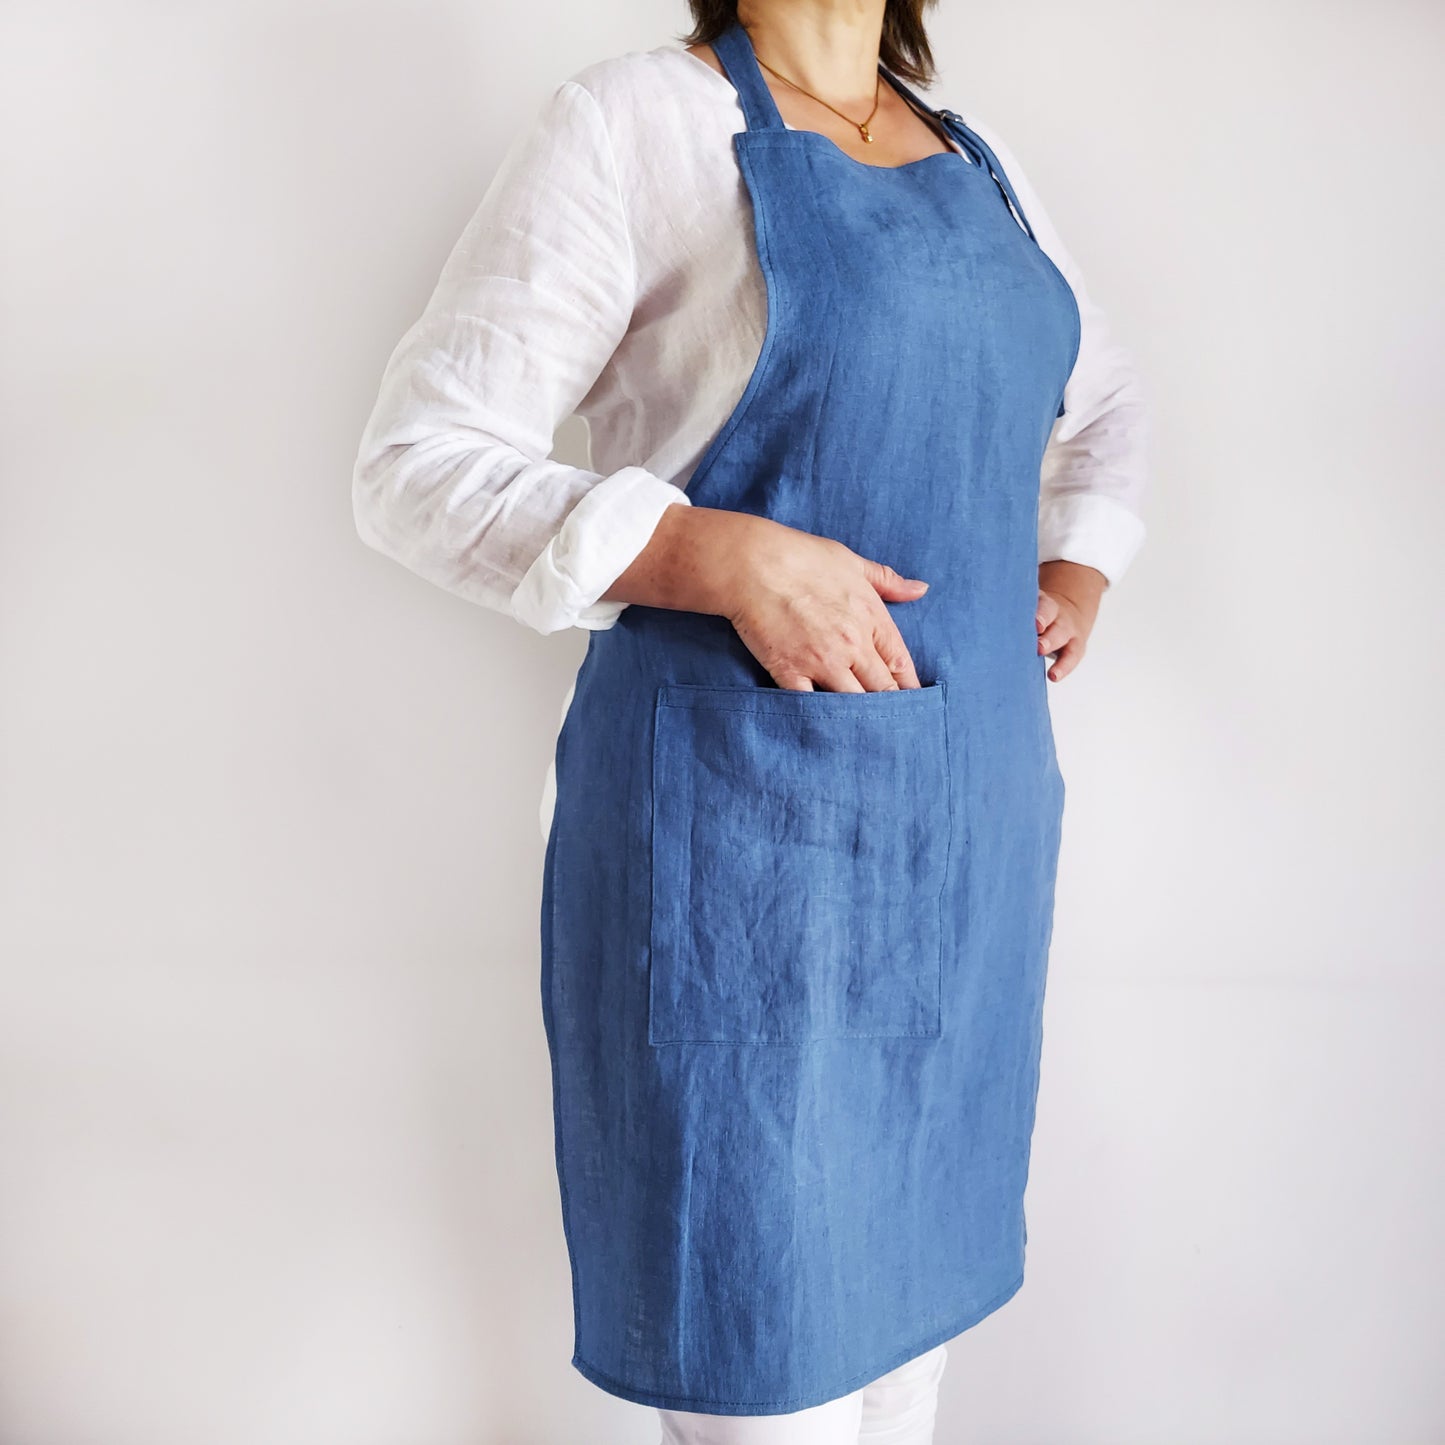 Linen Apron, Apron with pocket on right side, Cooking apron, 100% Linen